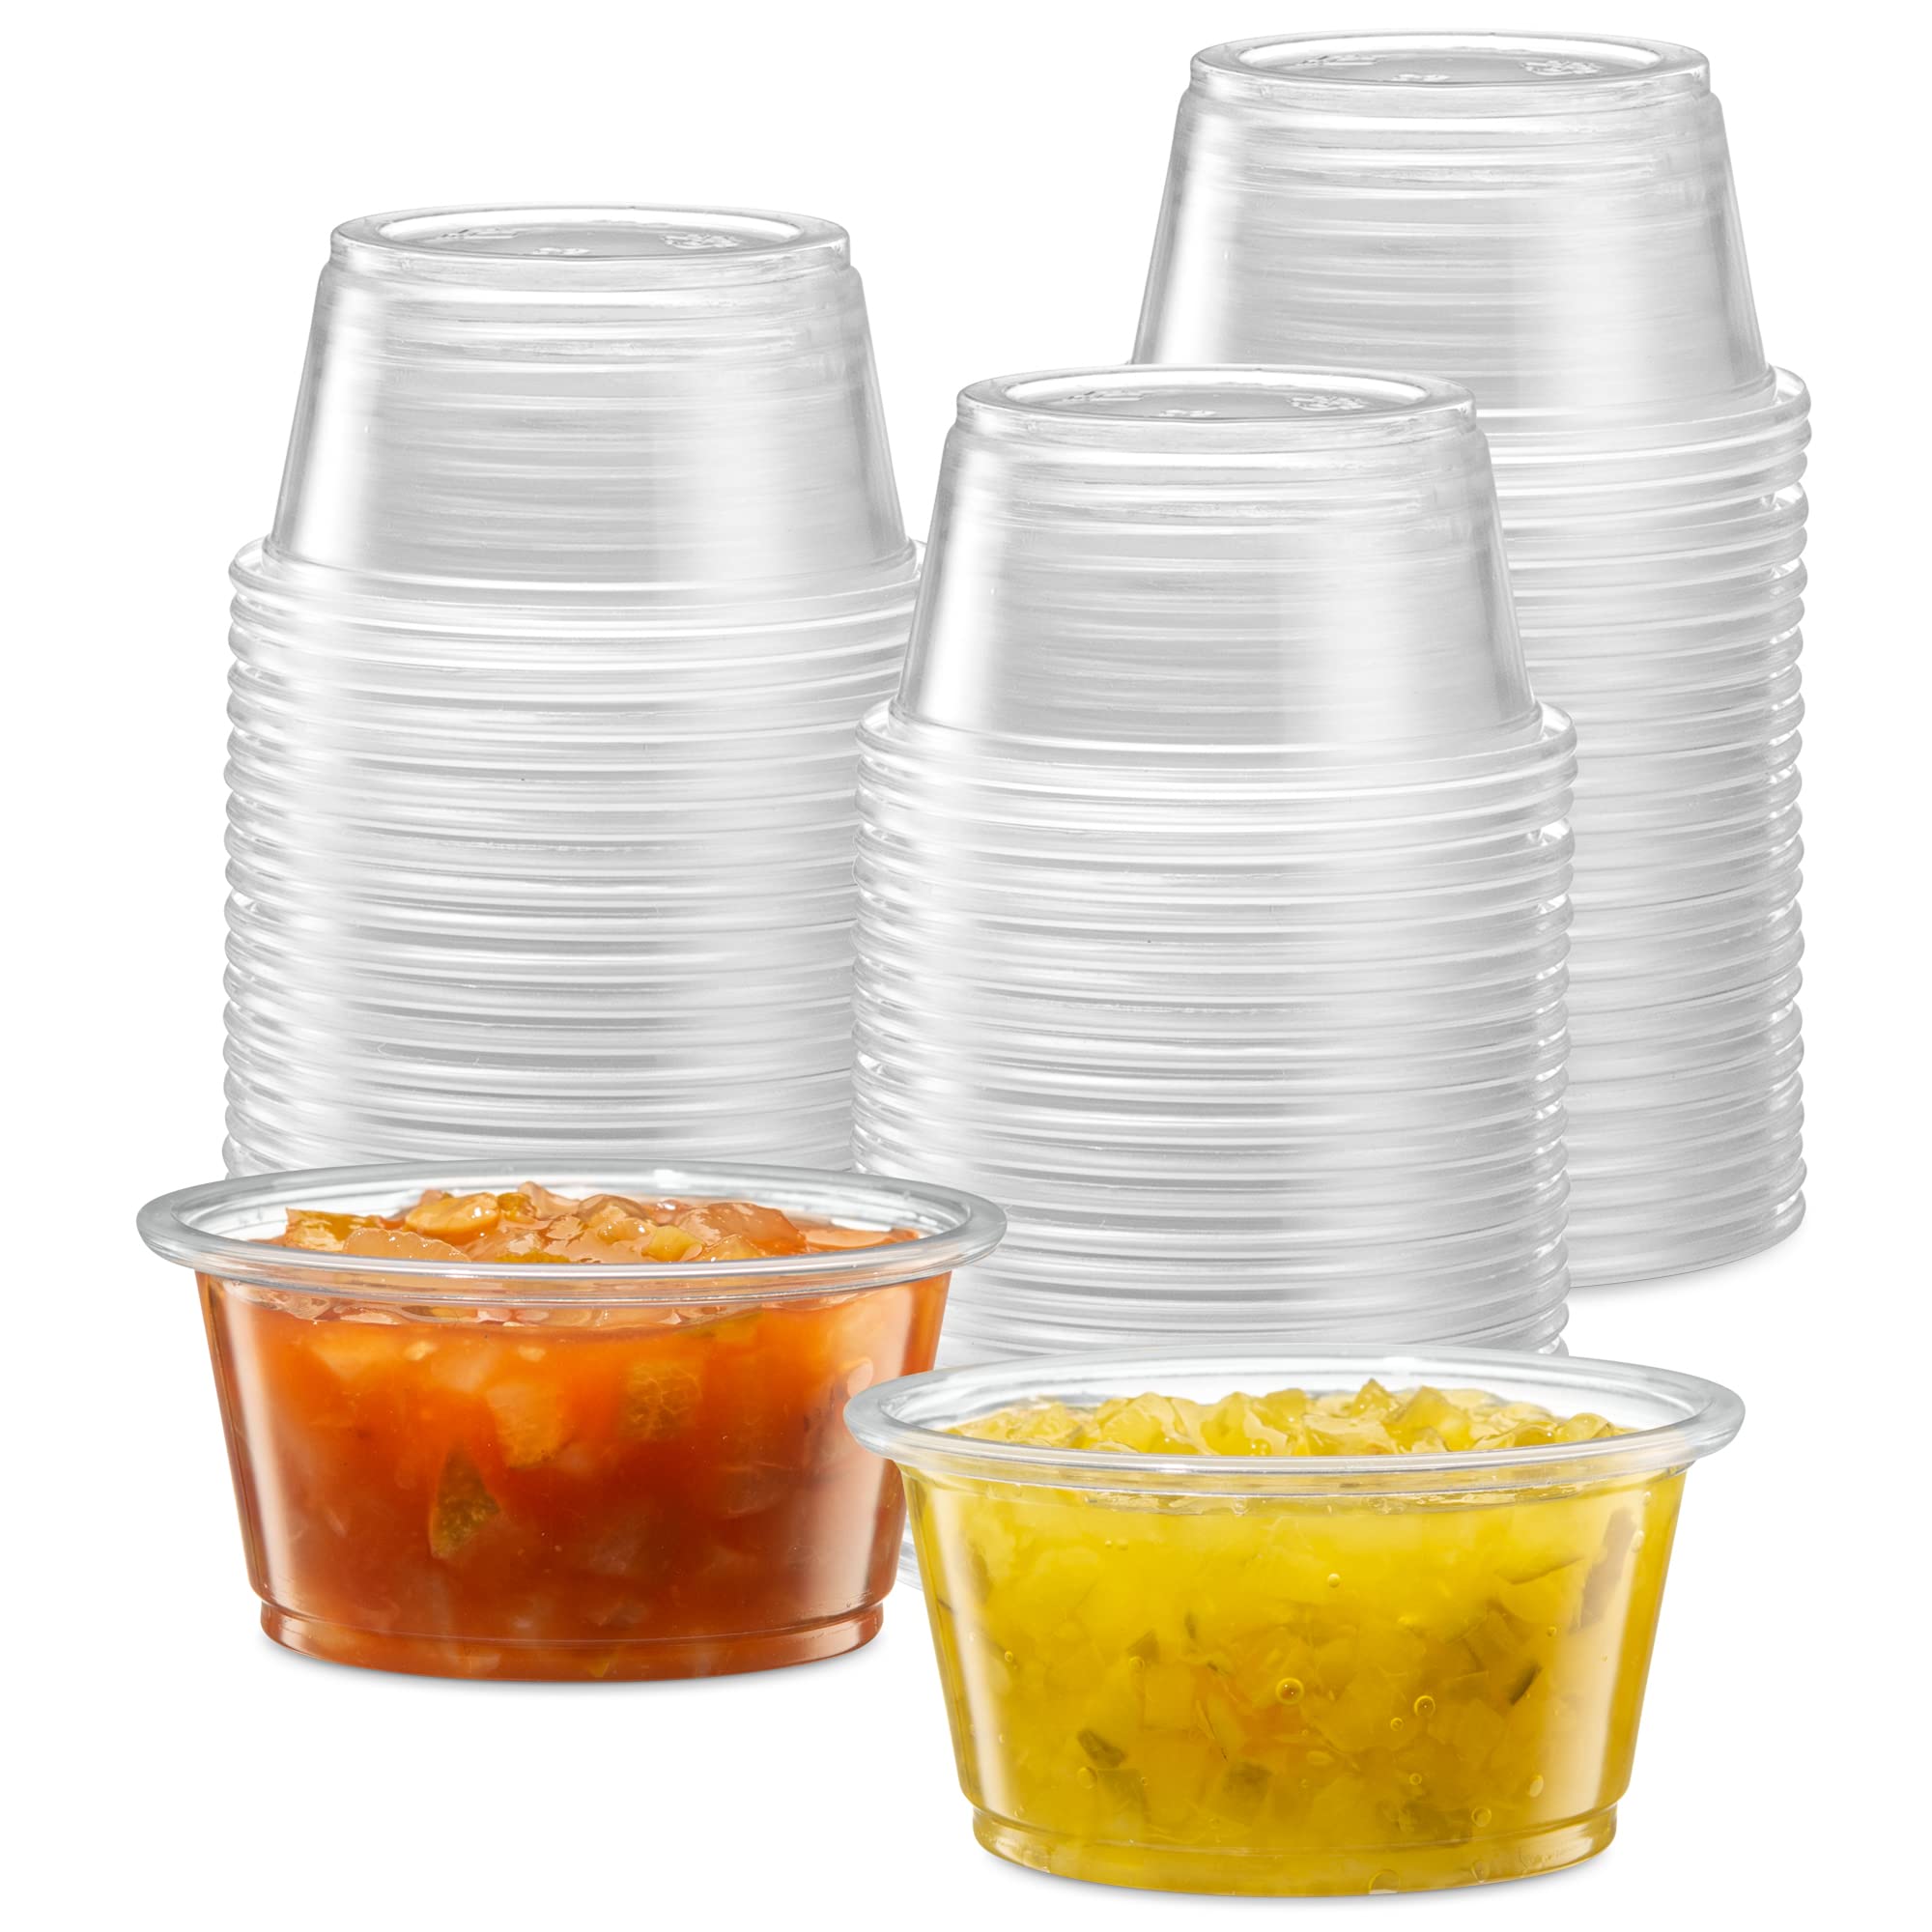 20 Pcs Portion Cups With Lids 1Ounces/30ml, Disposable Plastic Cups For  Meal Prep, Portion Control, Salad Dressing, Jelly Shots, & Medicine, Small  Pla